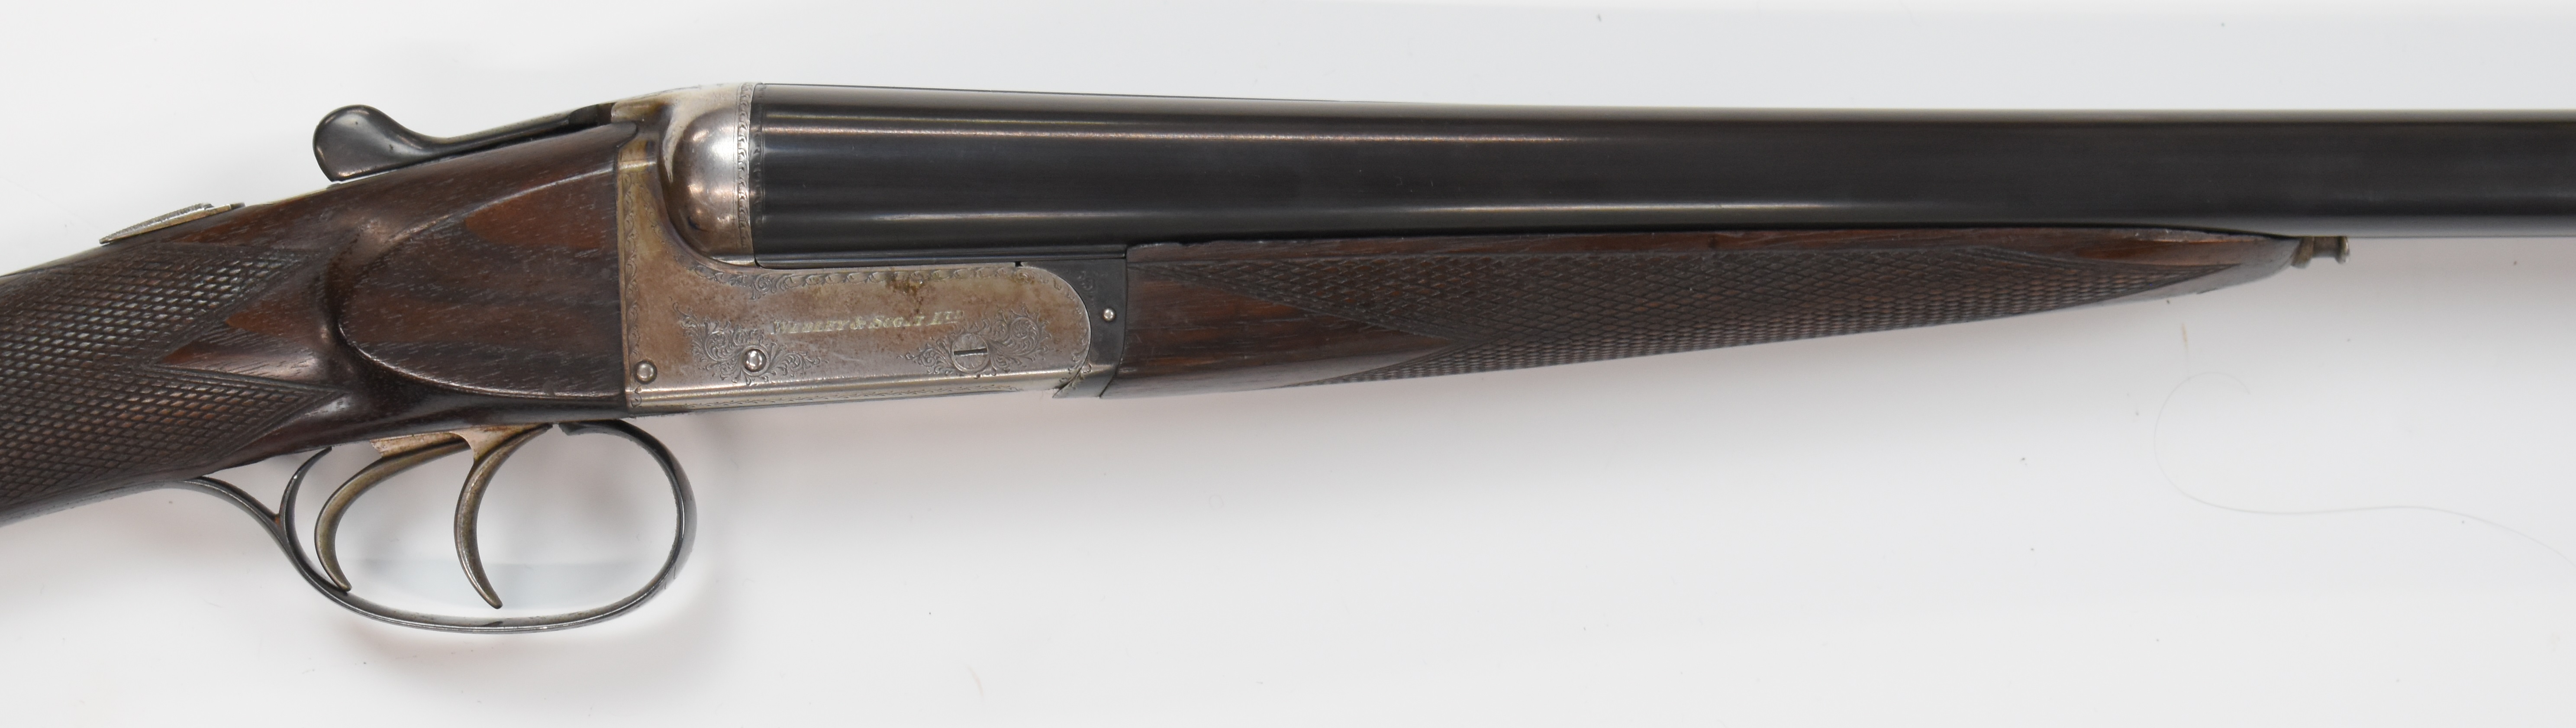 Webley & Scott 12 bore side by side ejector shotgun with named and engraved lock, border engraved - Image 4 of 6